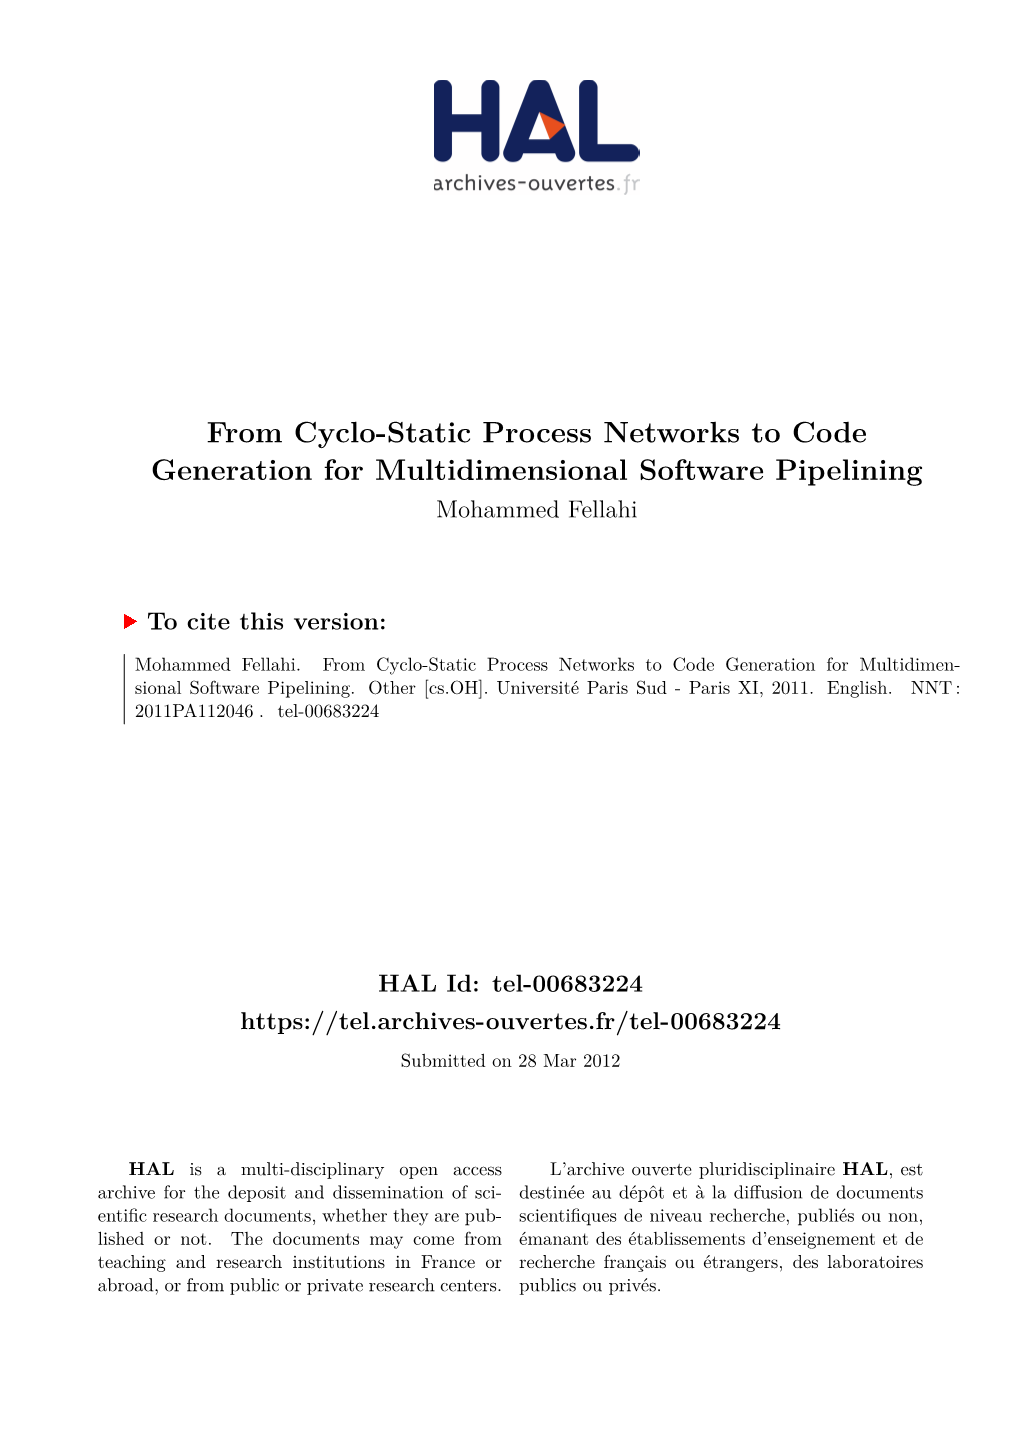 From Cyclo-Static Process Networks to Code Generation for Multidimensional Software Pipelining Mohammed Fellahi